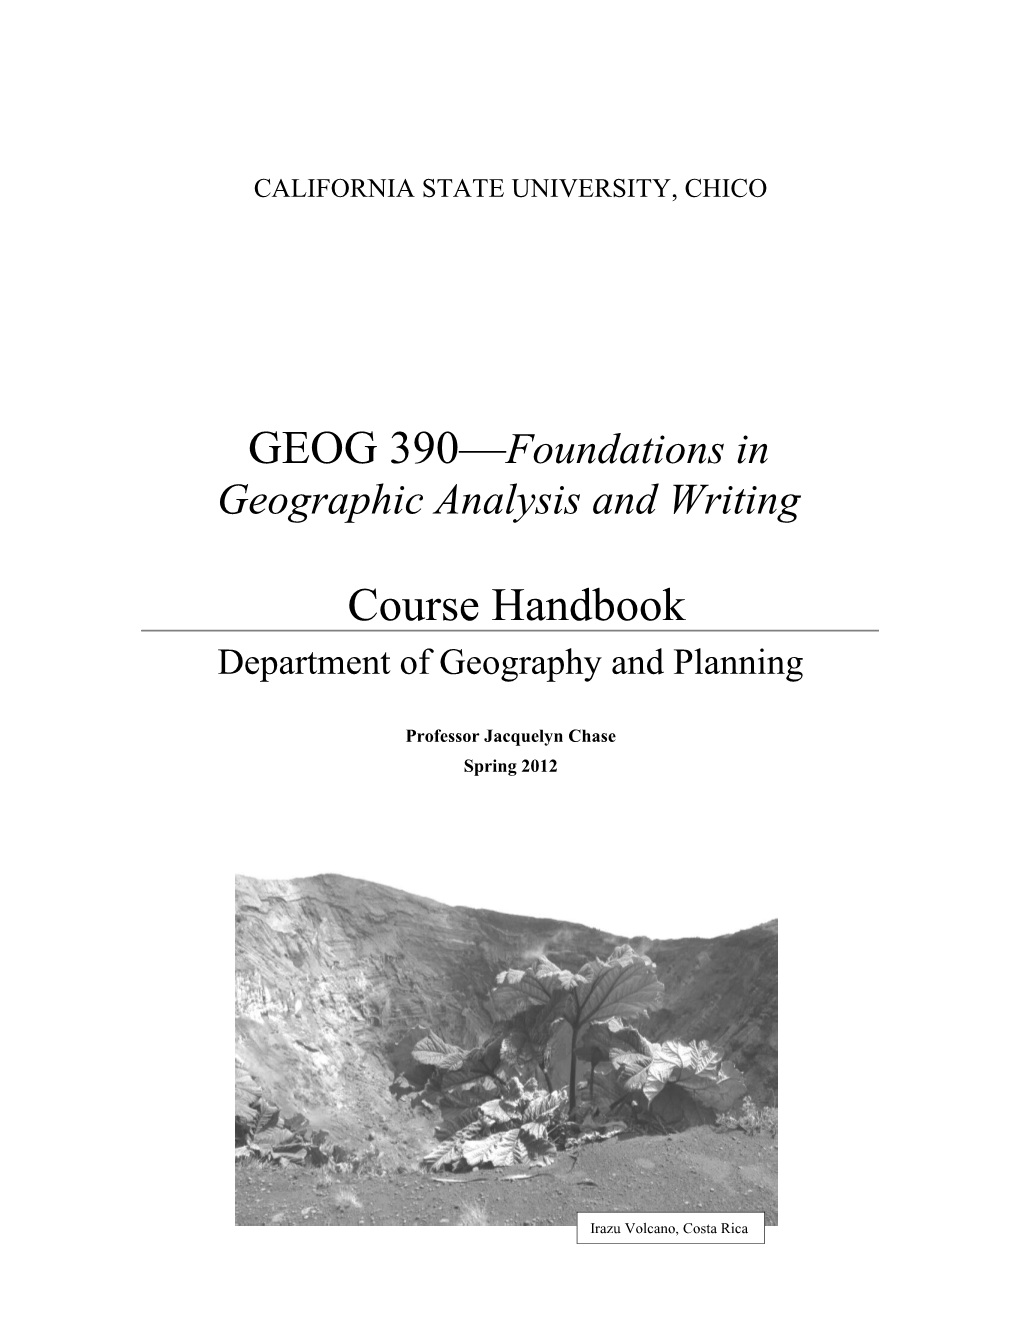 Geographical Research And Writing